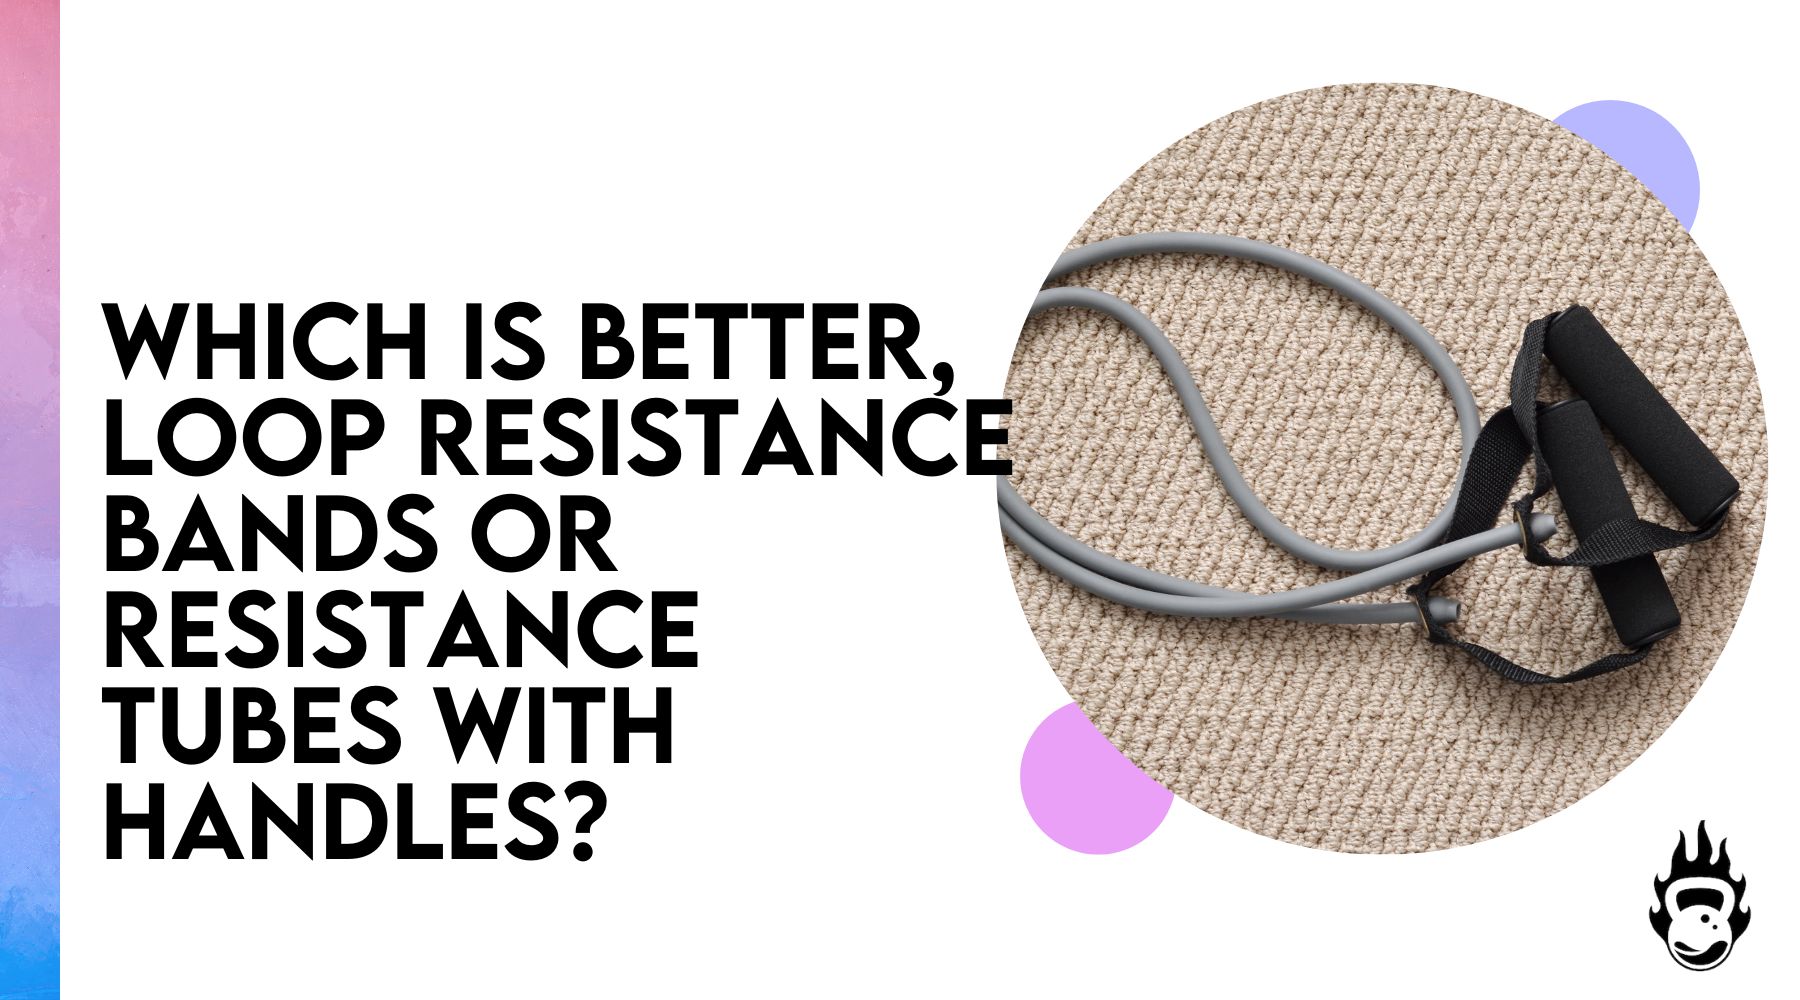 Which is better, loop resistance bands or resistance tubes with handles?